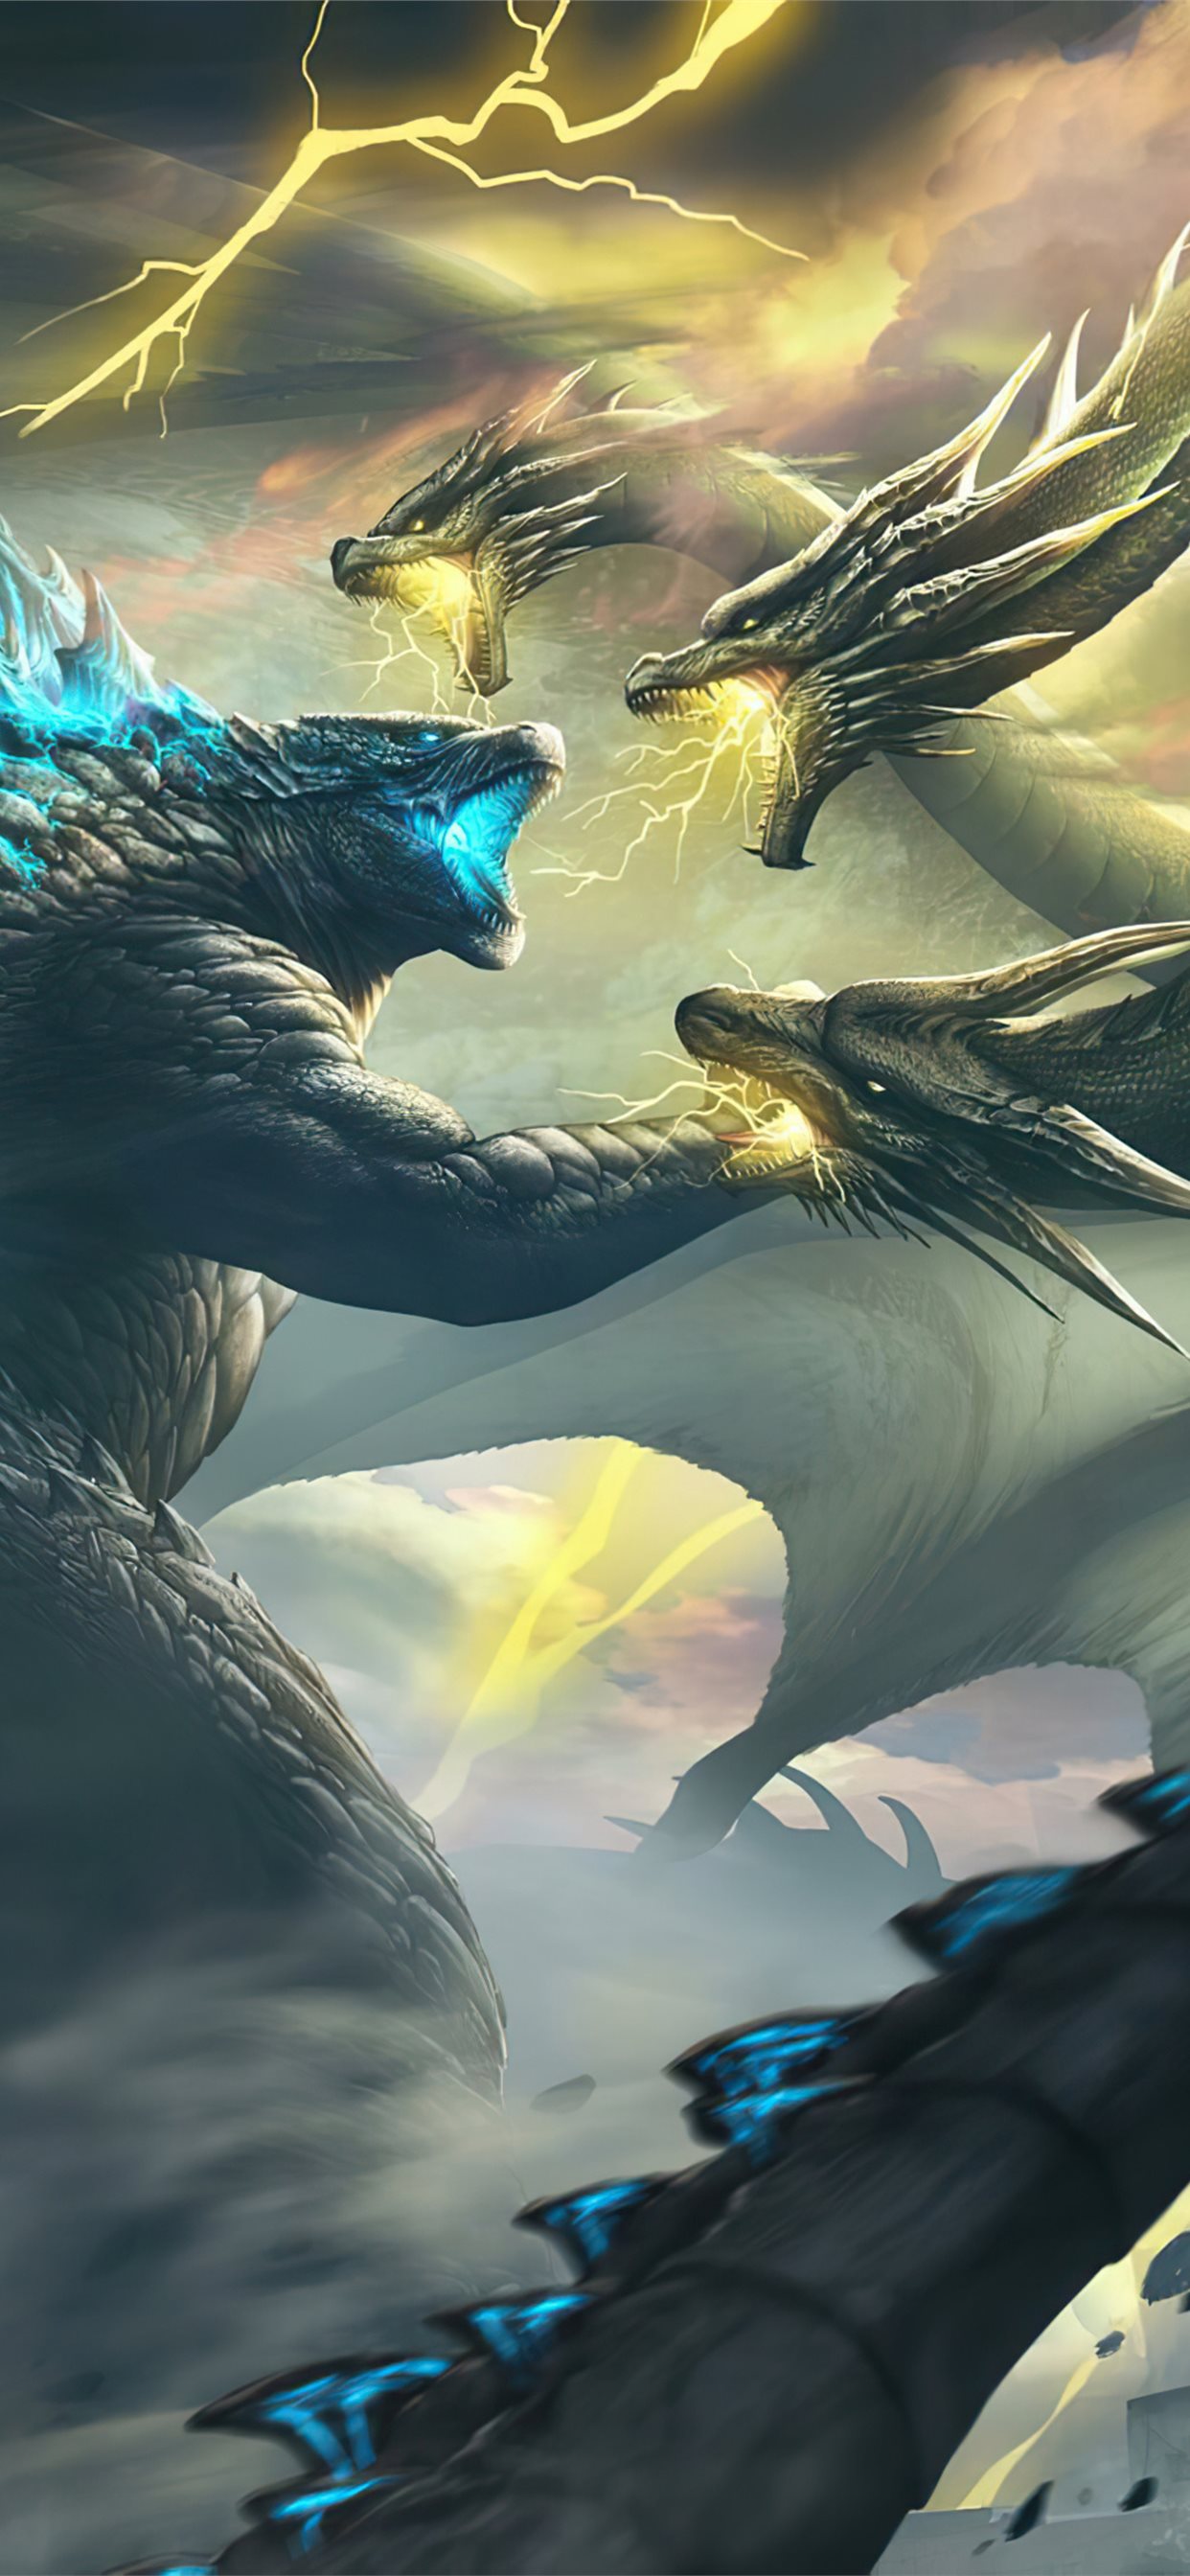 Godzilla King of the Monsters King Ghidorah 4K Wallpapers  HD Wallpapers   ID 28208